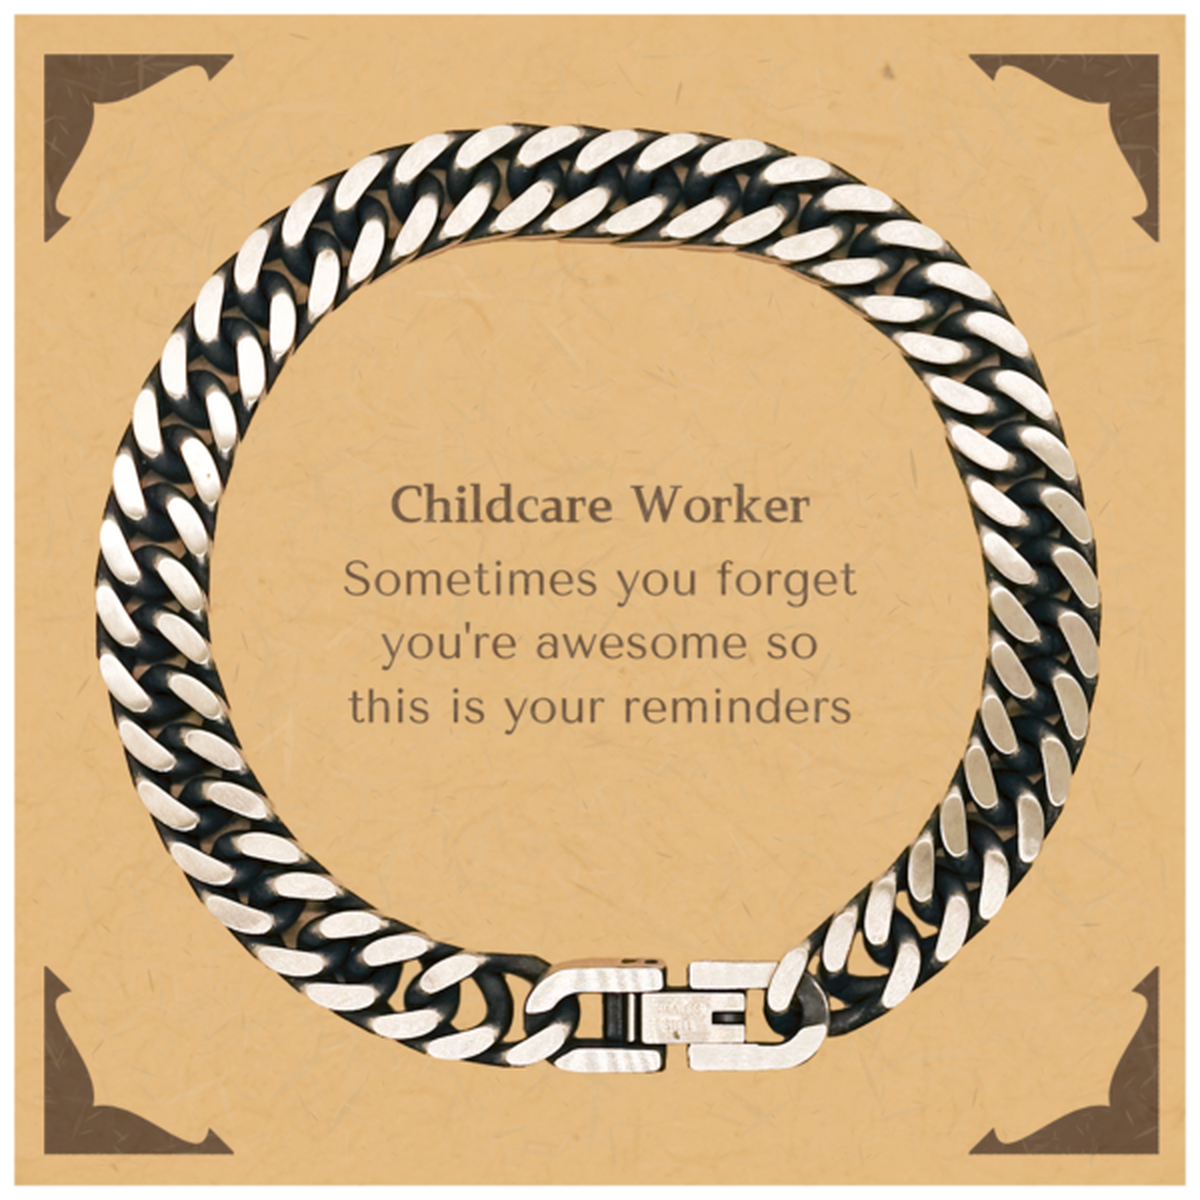 Sentimental Childcare Worker Cuban Link Chain Bracelet, Childcare Worker Sometimes you forget you're awesome so this is your reminders, Graduation Christmas Birthday Gifts for Childcare Worker, Men, Women, Coworkers